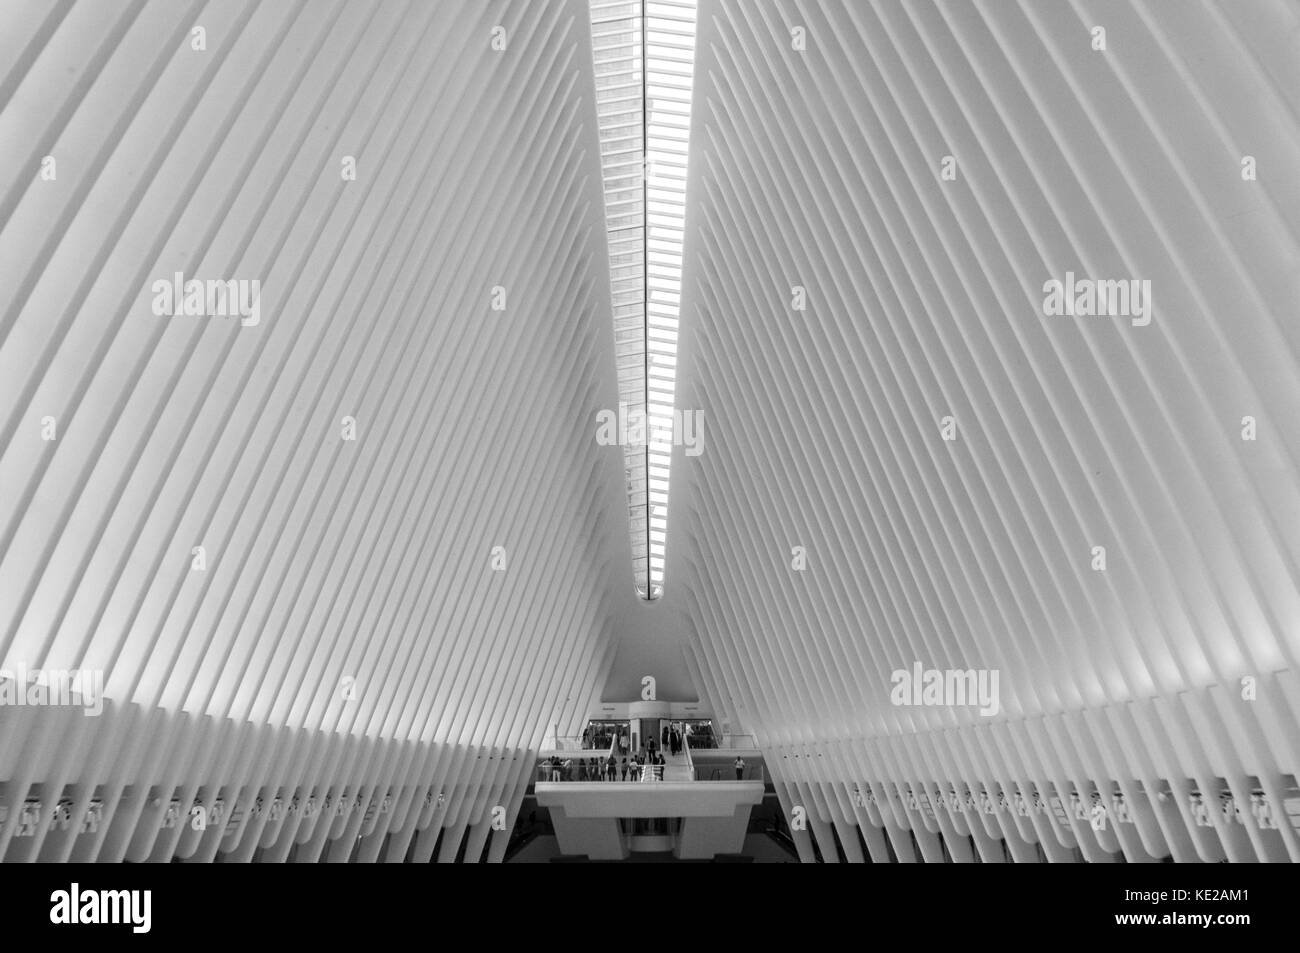 View inside the Oculus at the World Trade Center site in Manhattan, New York City. Stock Photo